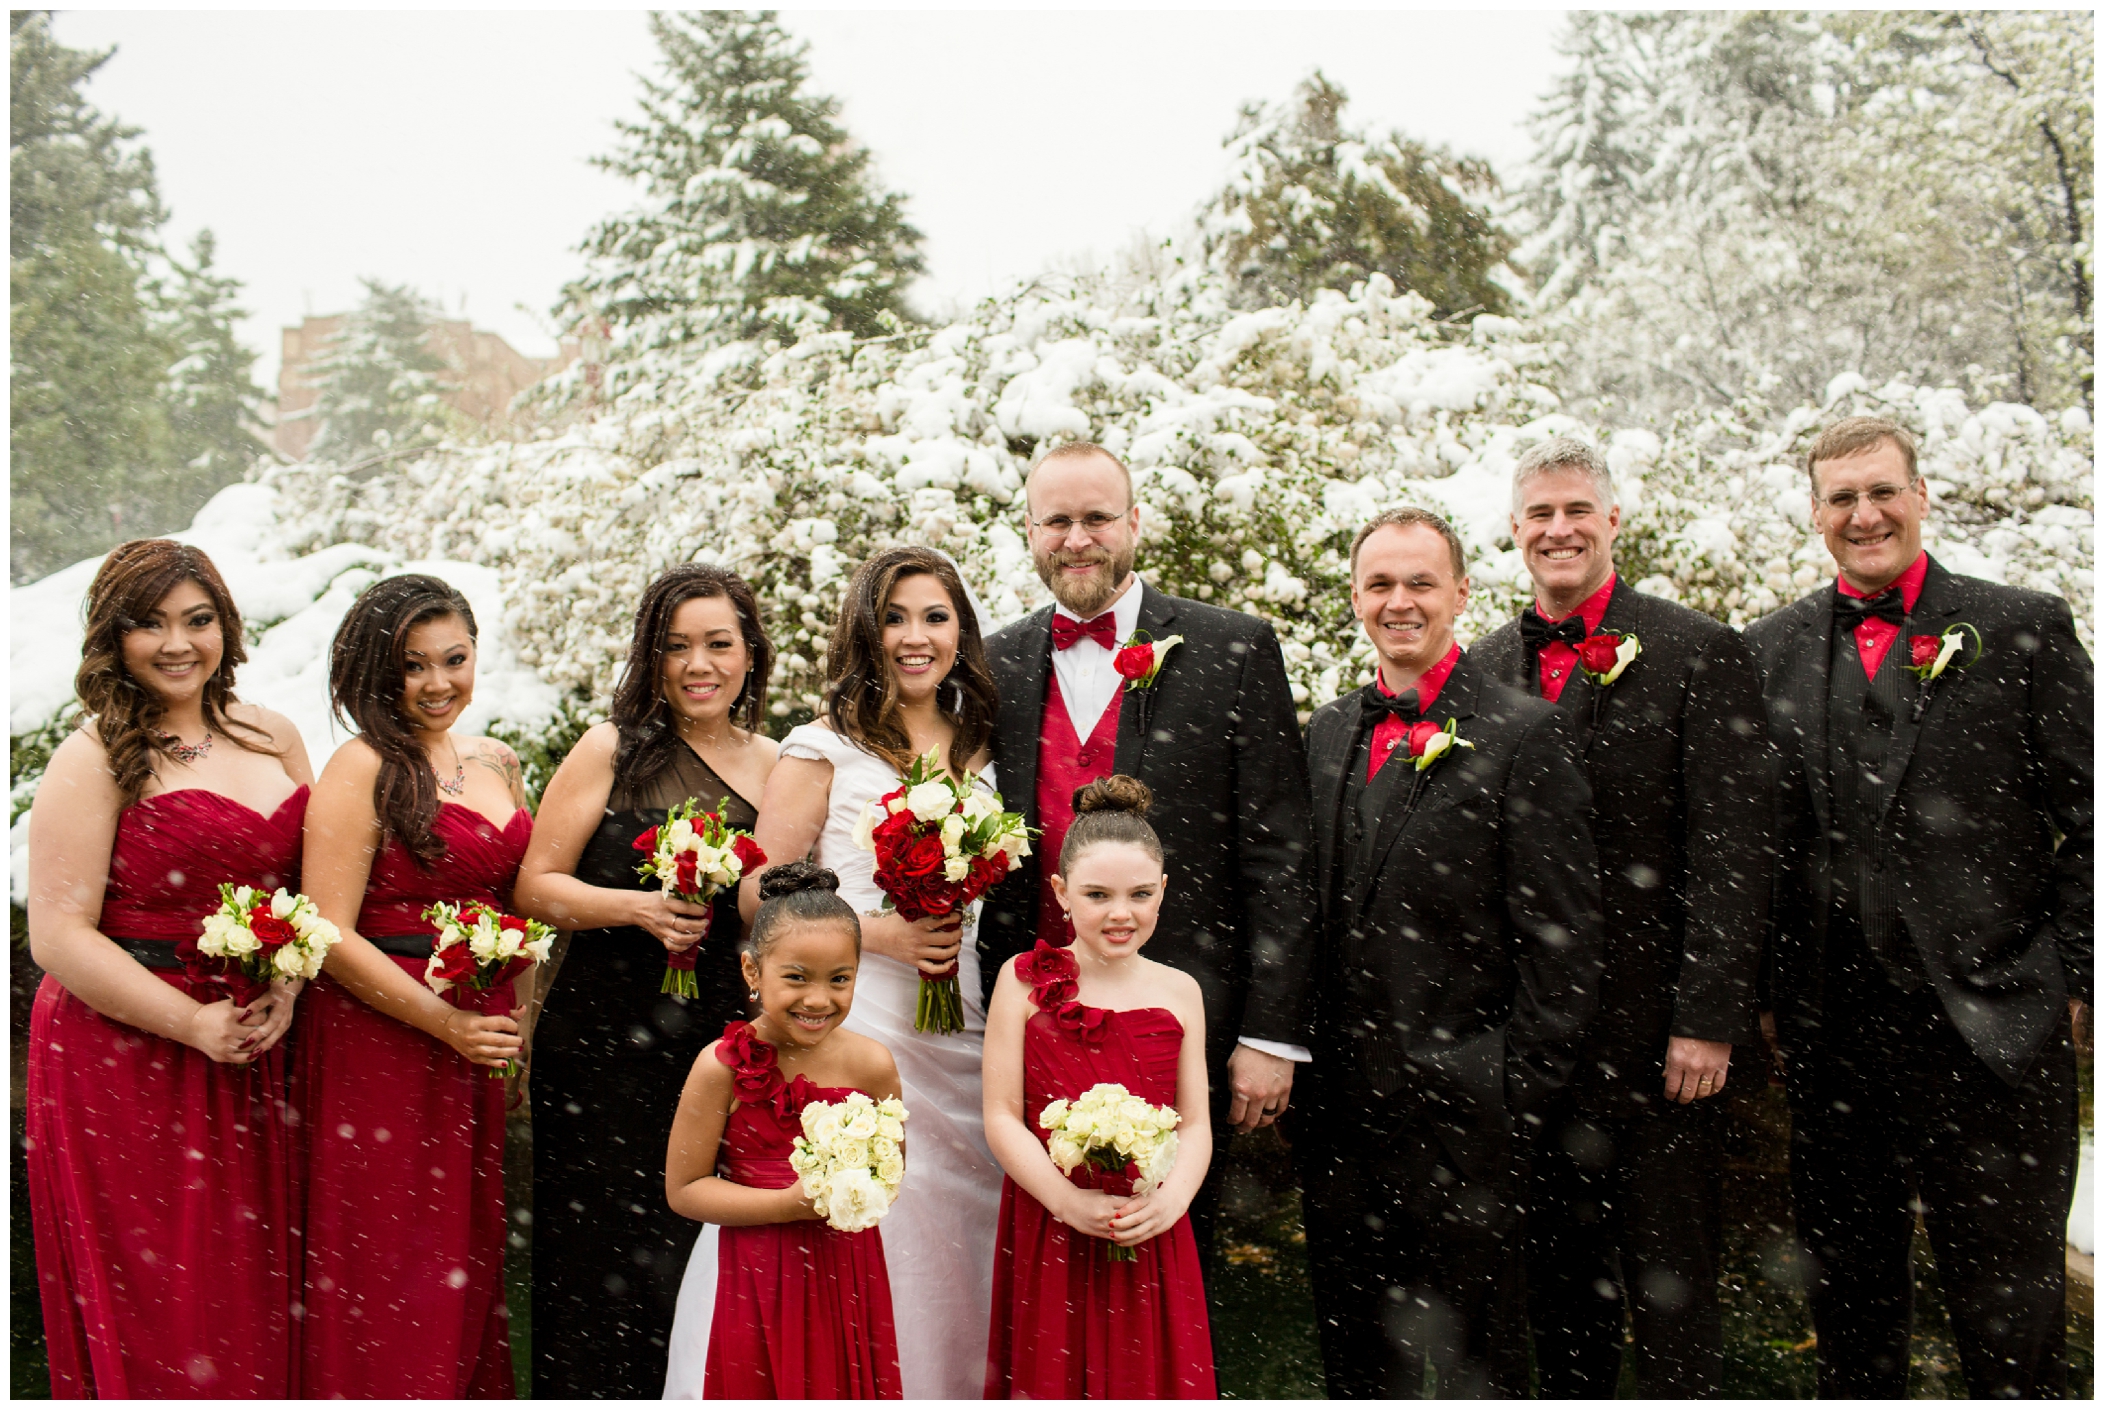 Snowy Colorado wedding photos by Plum Pretty Photography at the University of Denver